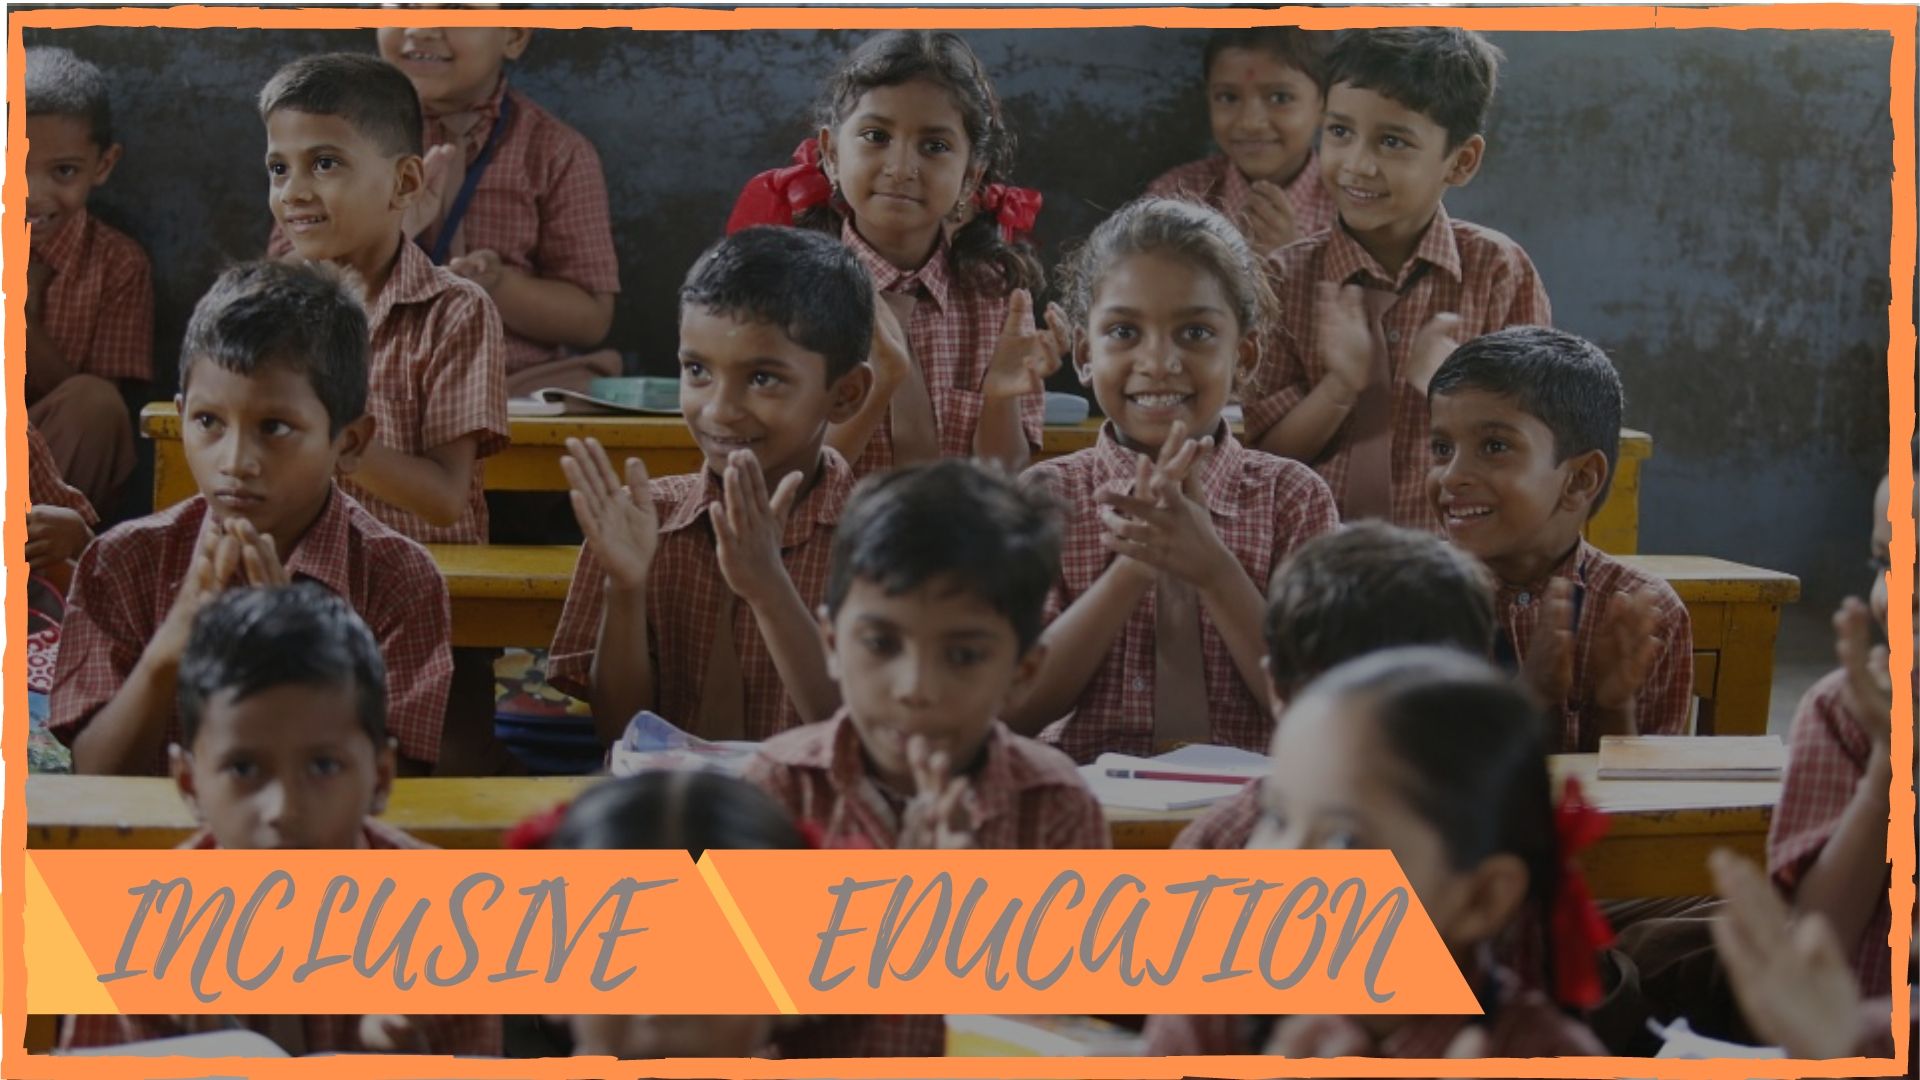 WHAT IS INCLUSIVE EDUCATION? CHARACTERISTICS, BENEFITS AND STRATEGIES